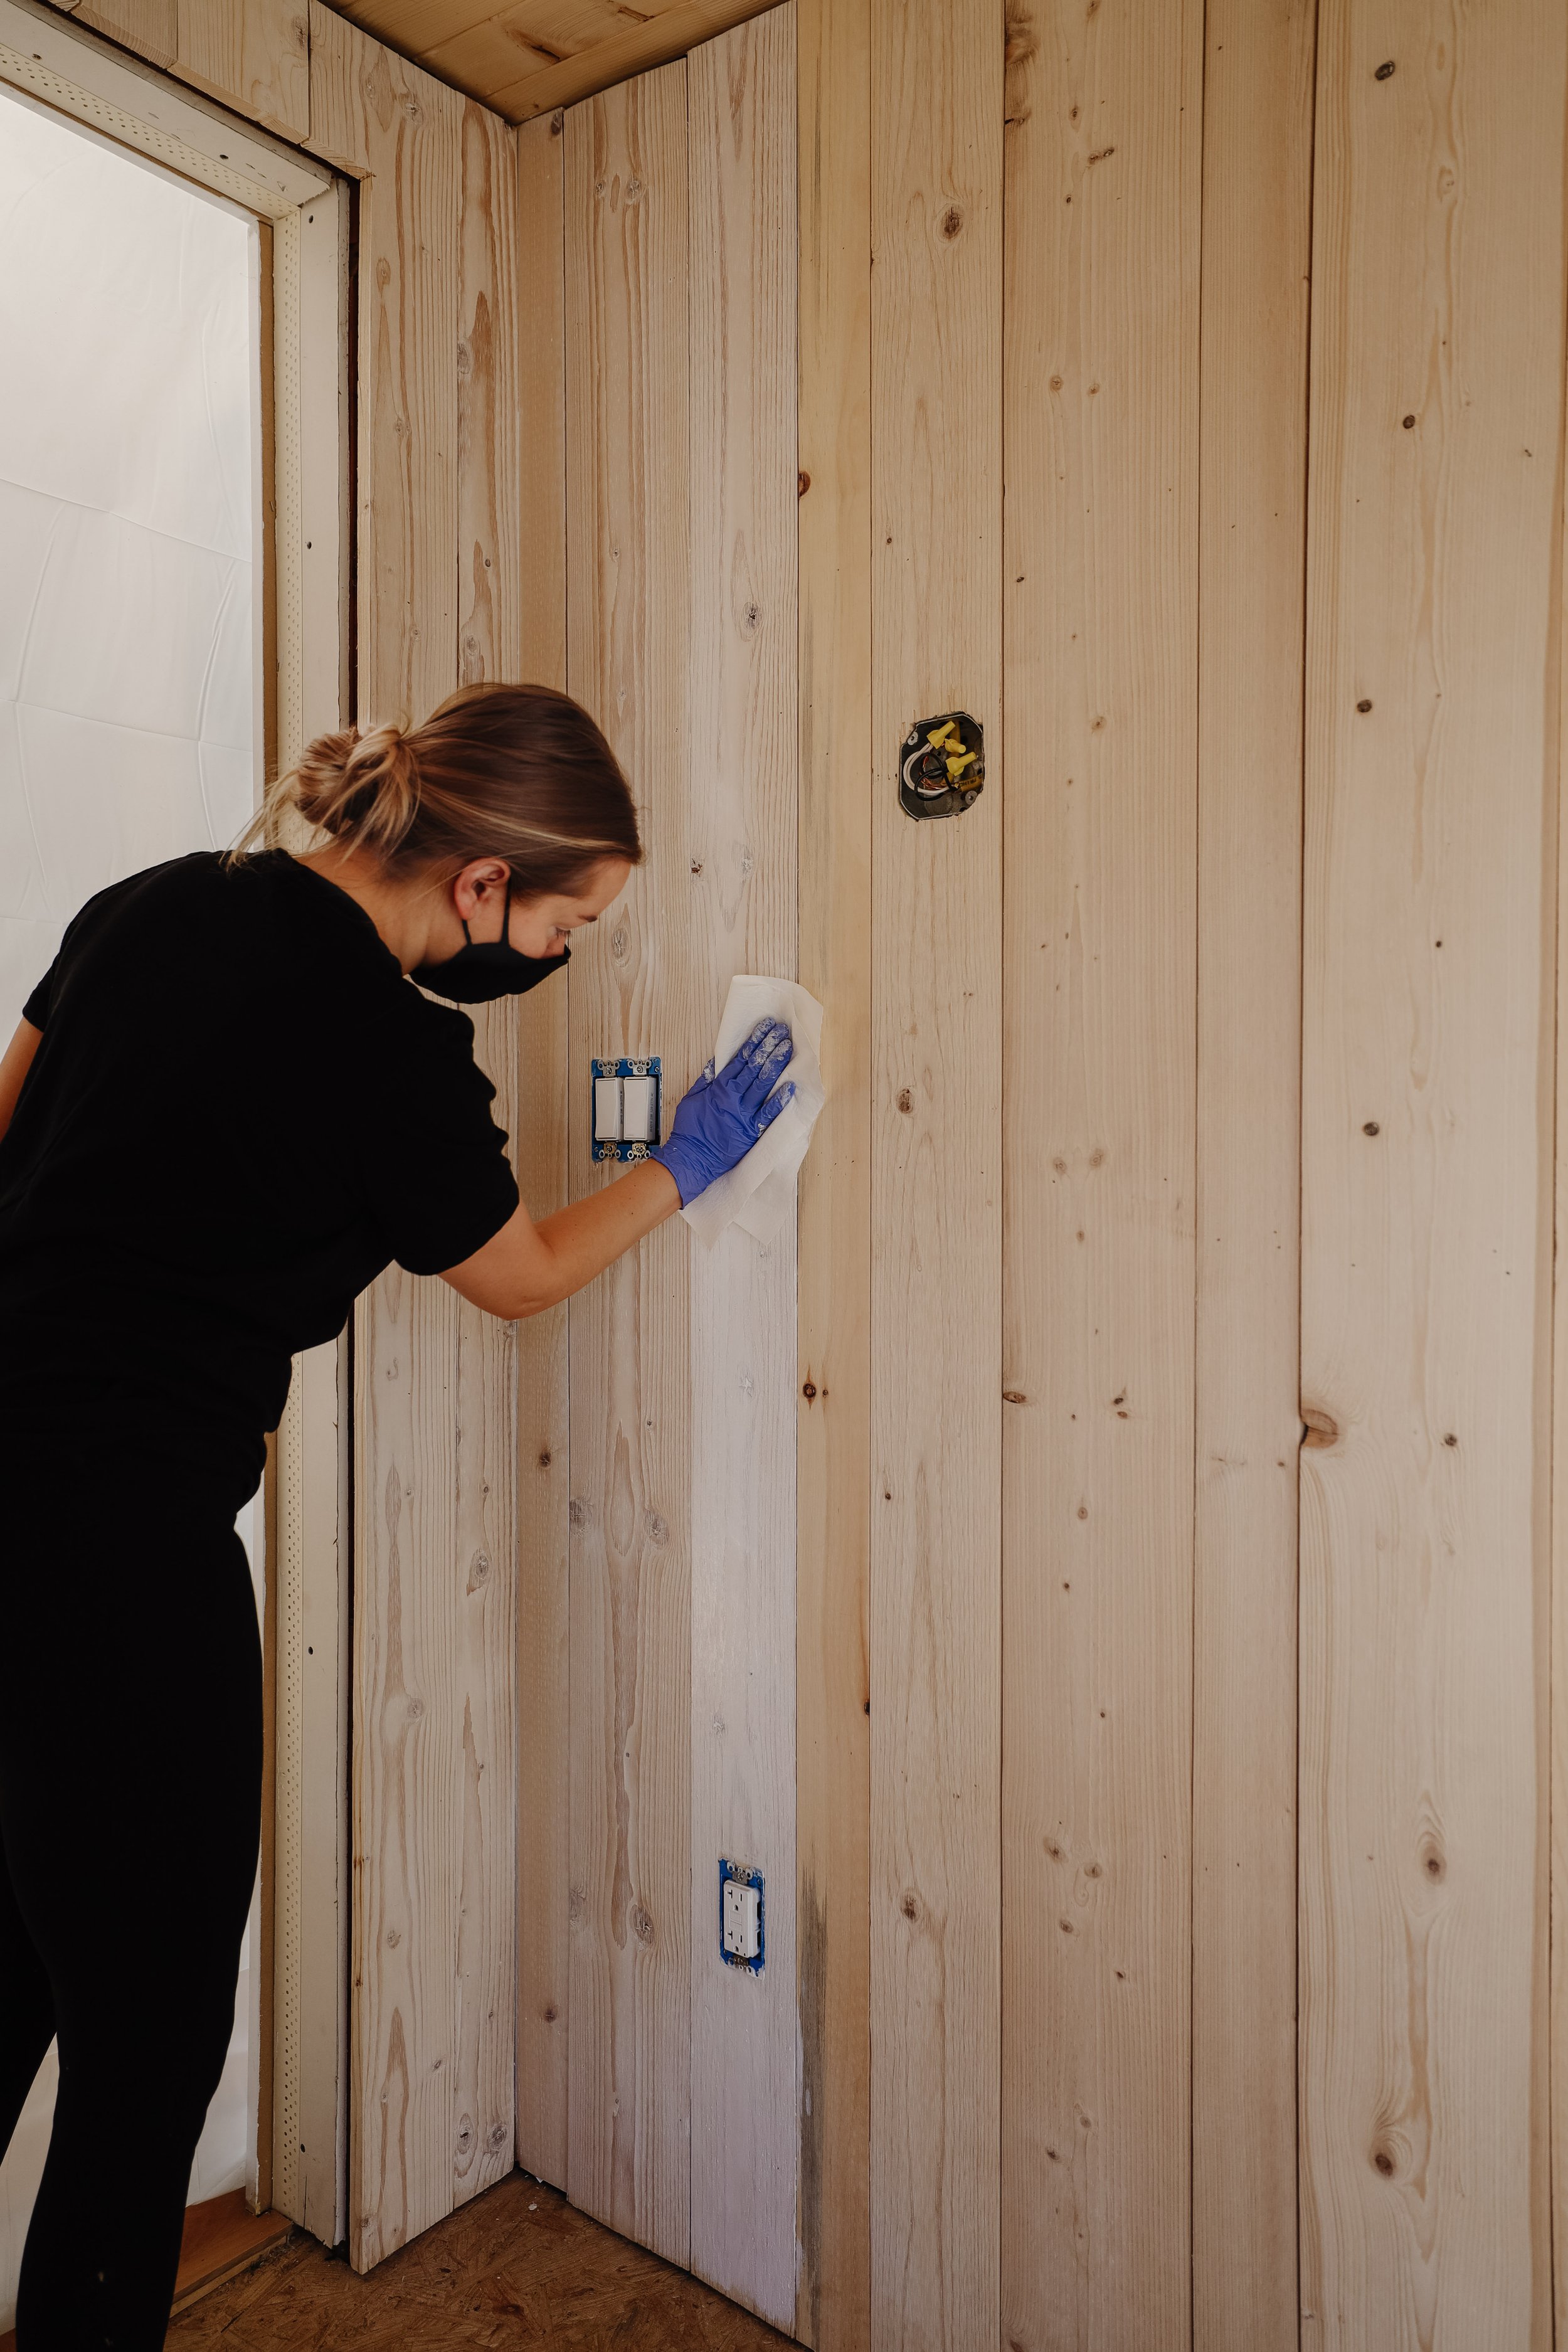 How to install vertical wood planks over studs. How to install wood planks on a ceiling. How to make new wood look old. How to install vertical shiplap. Dark wood stain I love that looks weathered. DIY weathered wood walls and ceiling | Nadine Stay